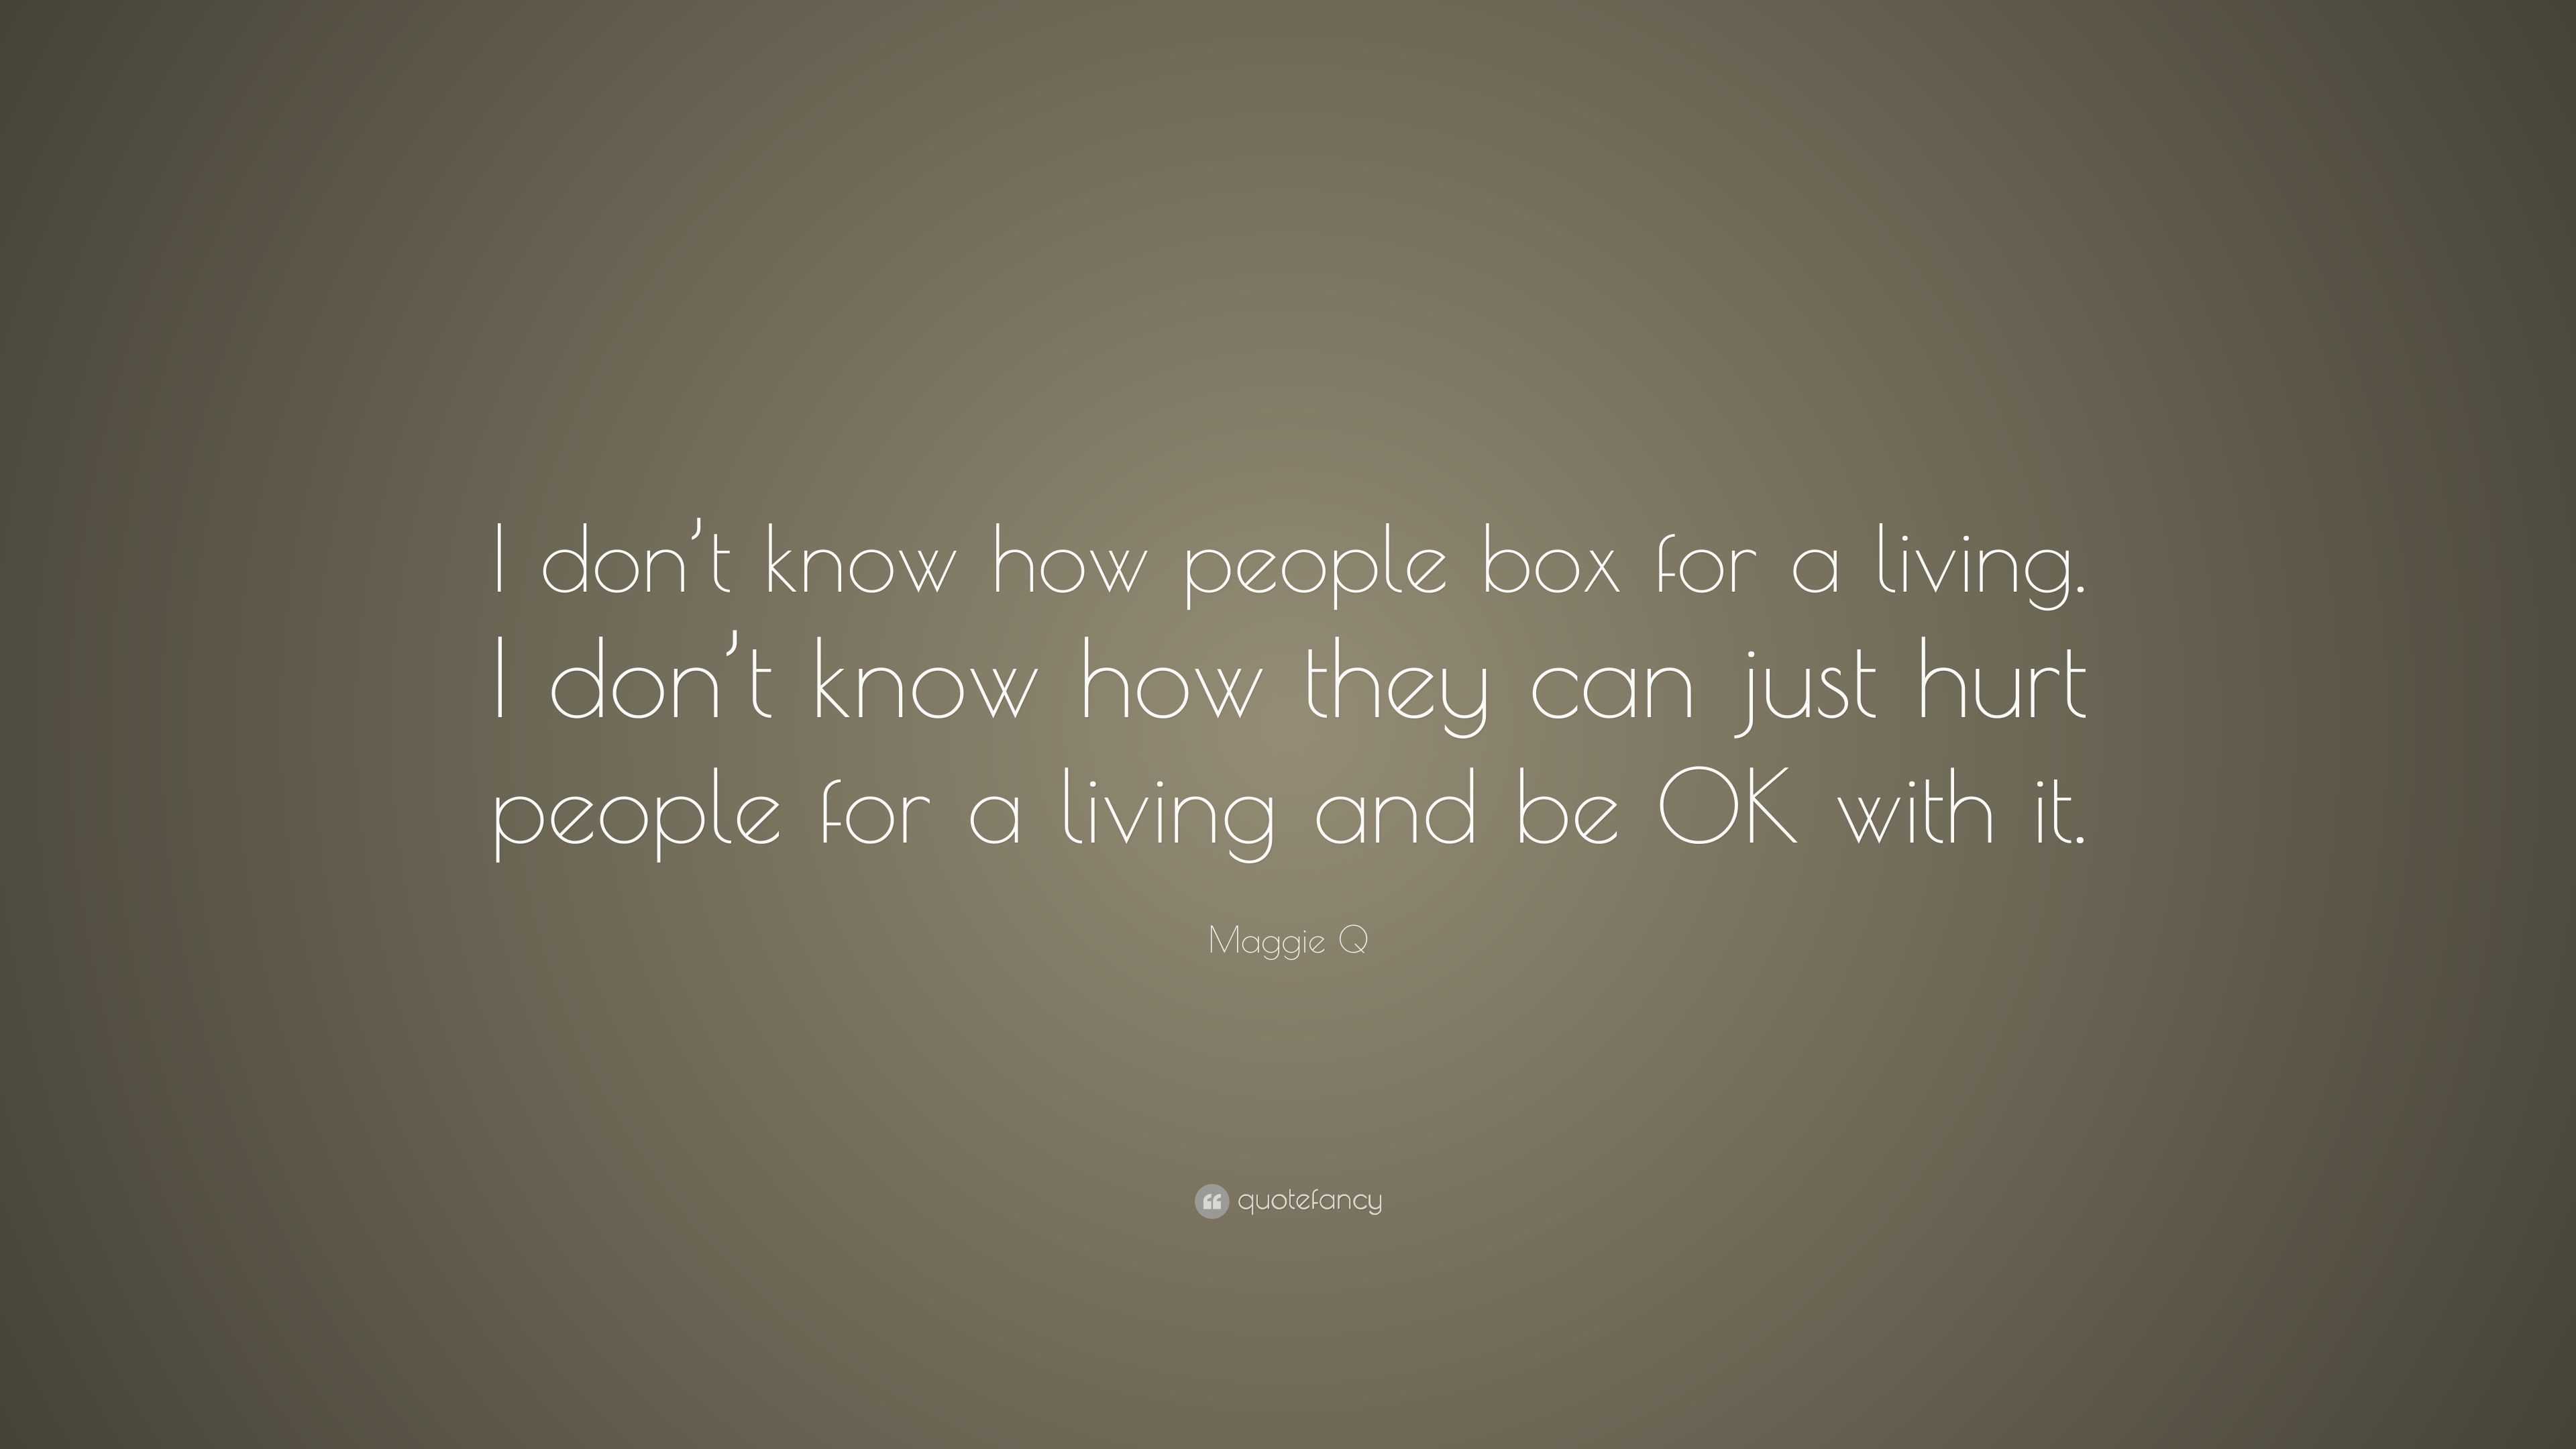 Maggie Q Quote: “I don’t know how people box for a living. I don’t know ...